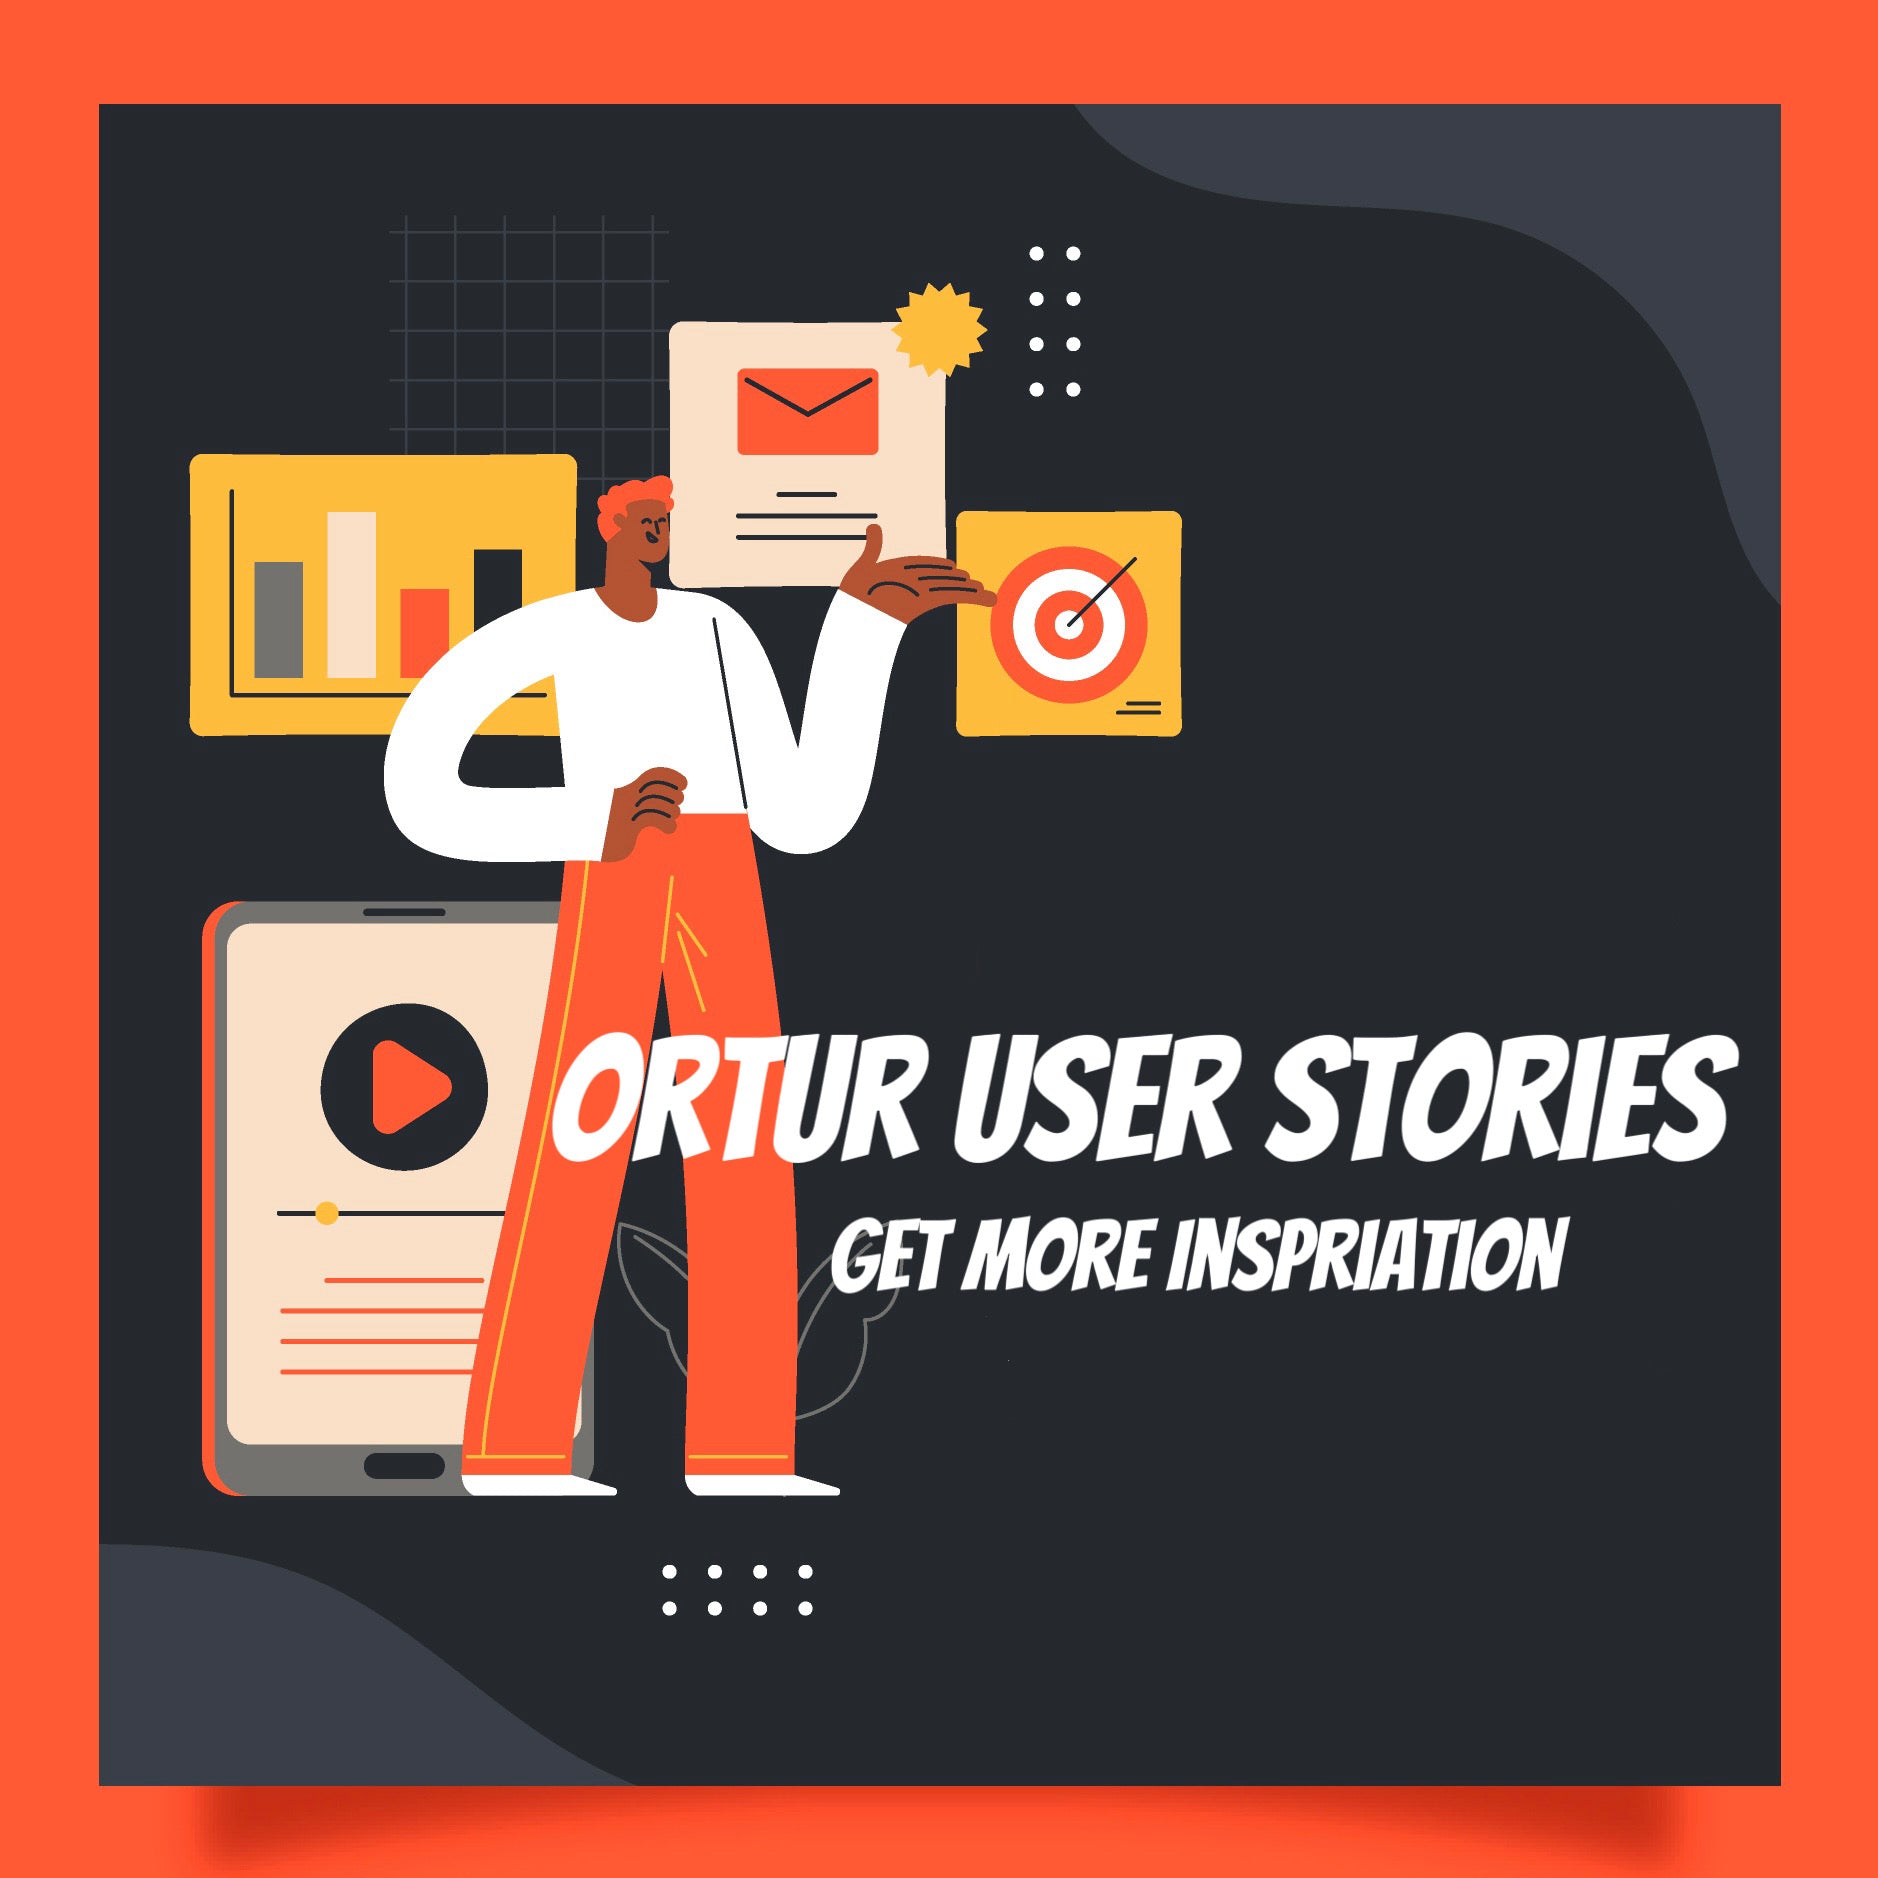 Get More Inspiration from Ortur User Stories